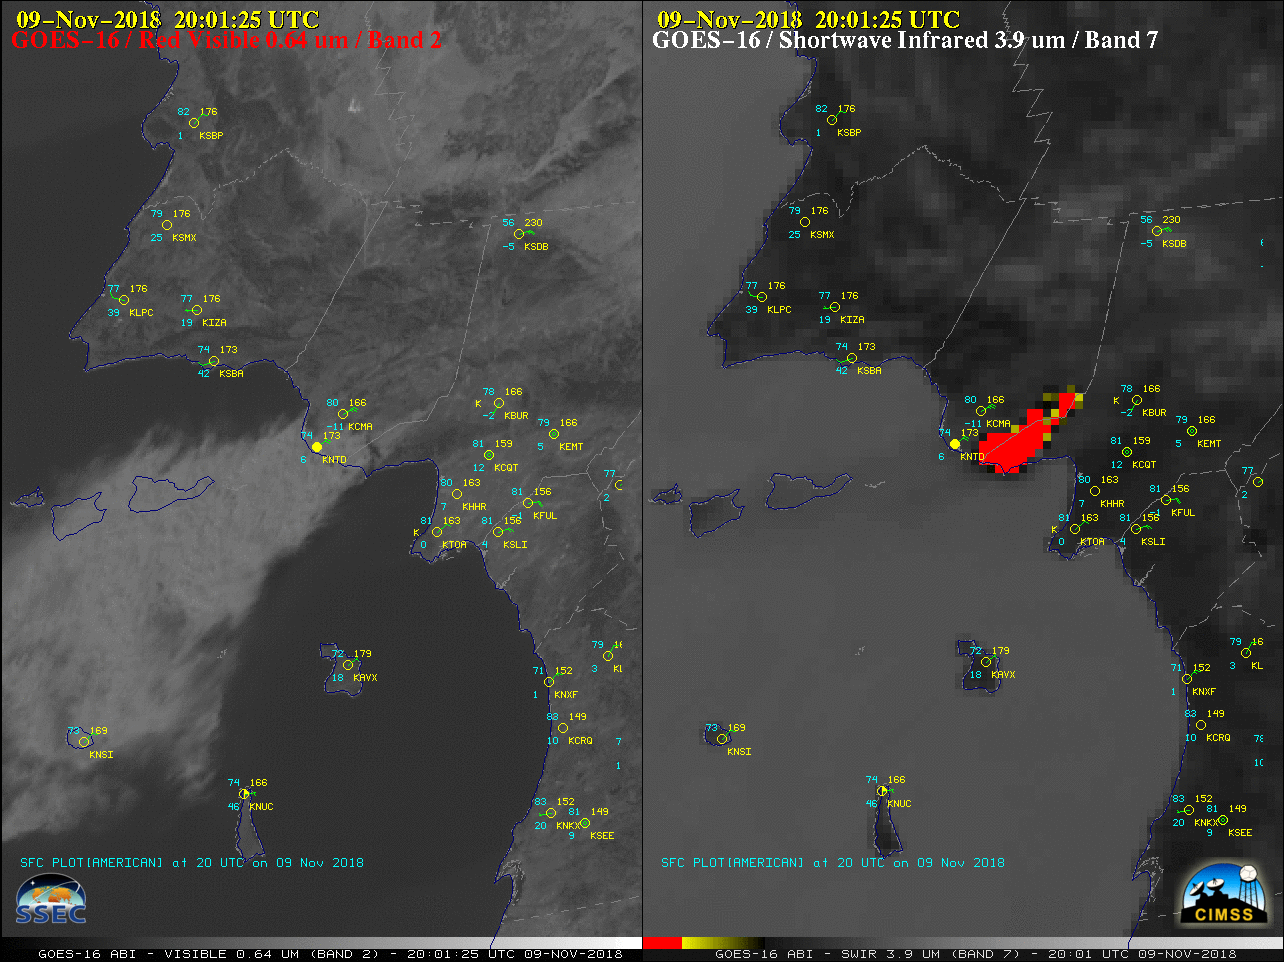 GOES-16 “Red” Visible (0.64 µm, left) and Shortwave Infrared (3.9 µm, right) images [click to play MP4 animation]